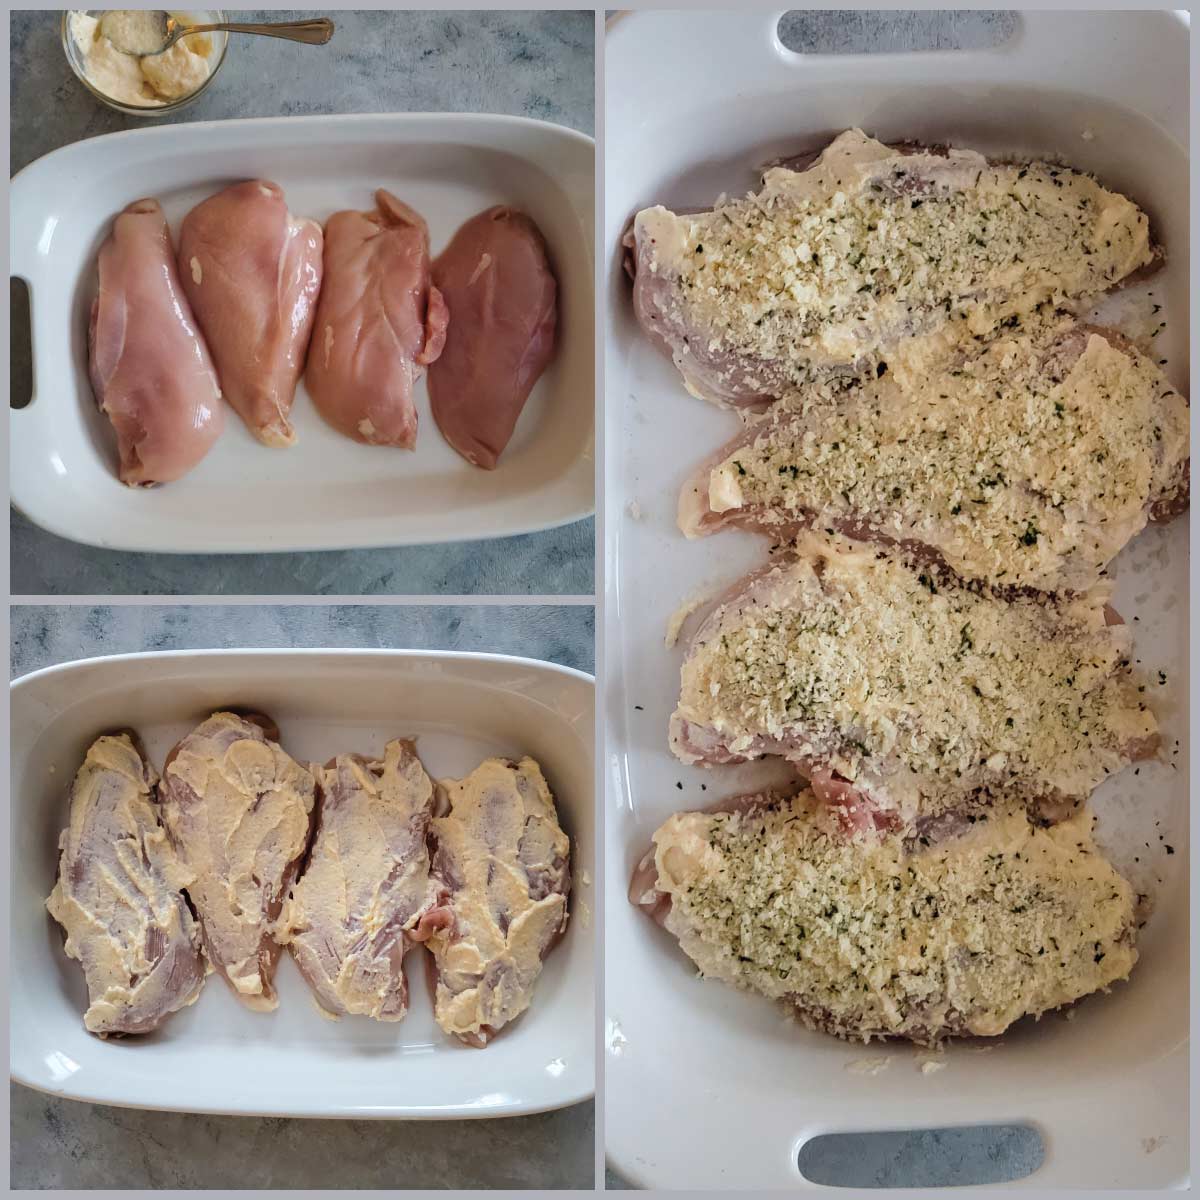 Steps for coating the chicken breasts - coating with mayo mixture and then topping with breadcrumbs.